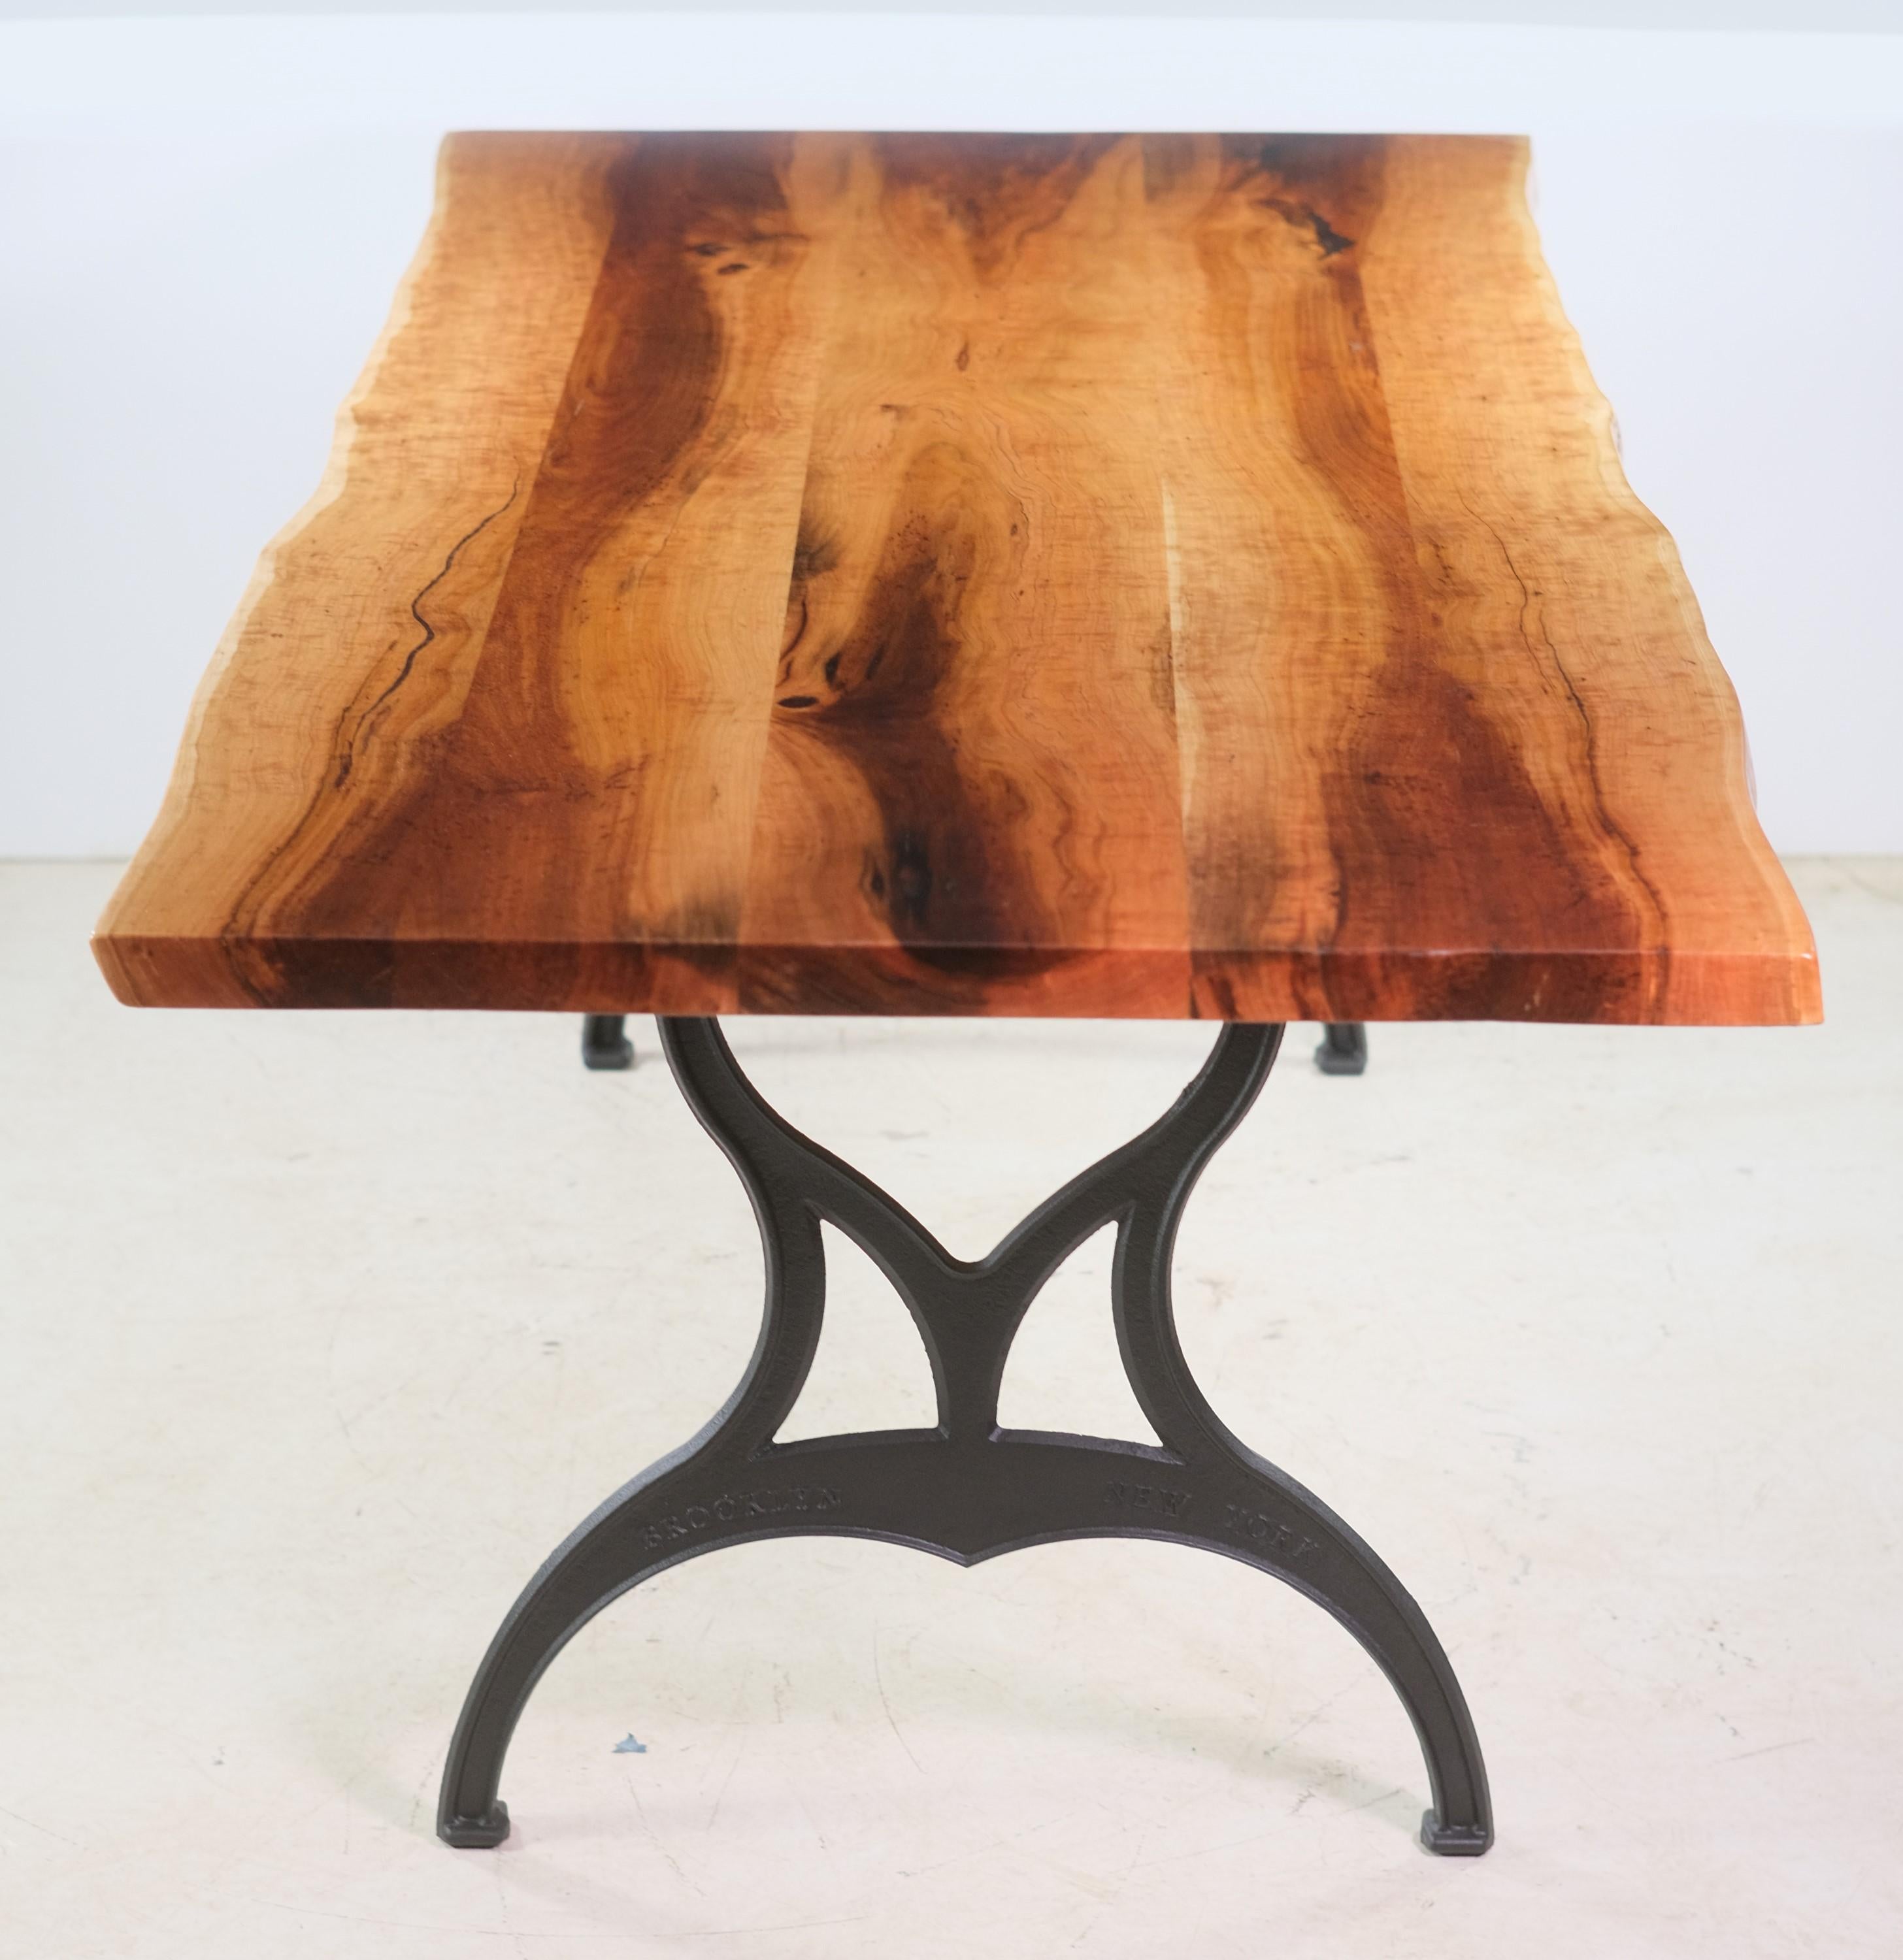 Newly made table featuring a double slab live edge cherry top with Brooklyn, New York cast iron legs. Live edges follow the original curves of the tree truck. Resin accent where the tree branched into parts. The slabs have an epoxy base coat and